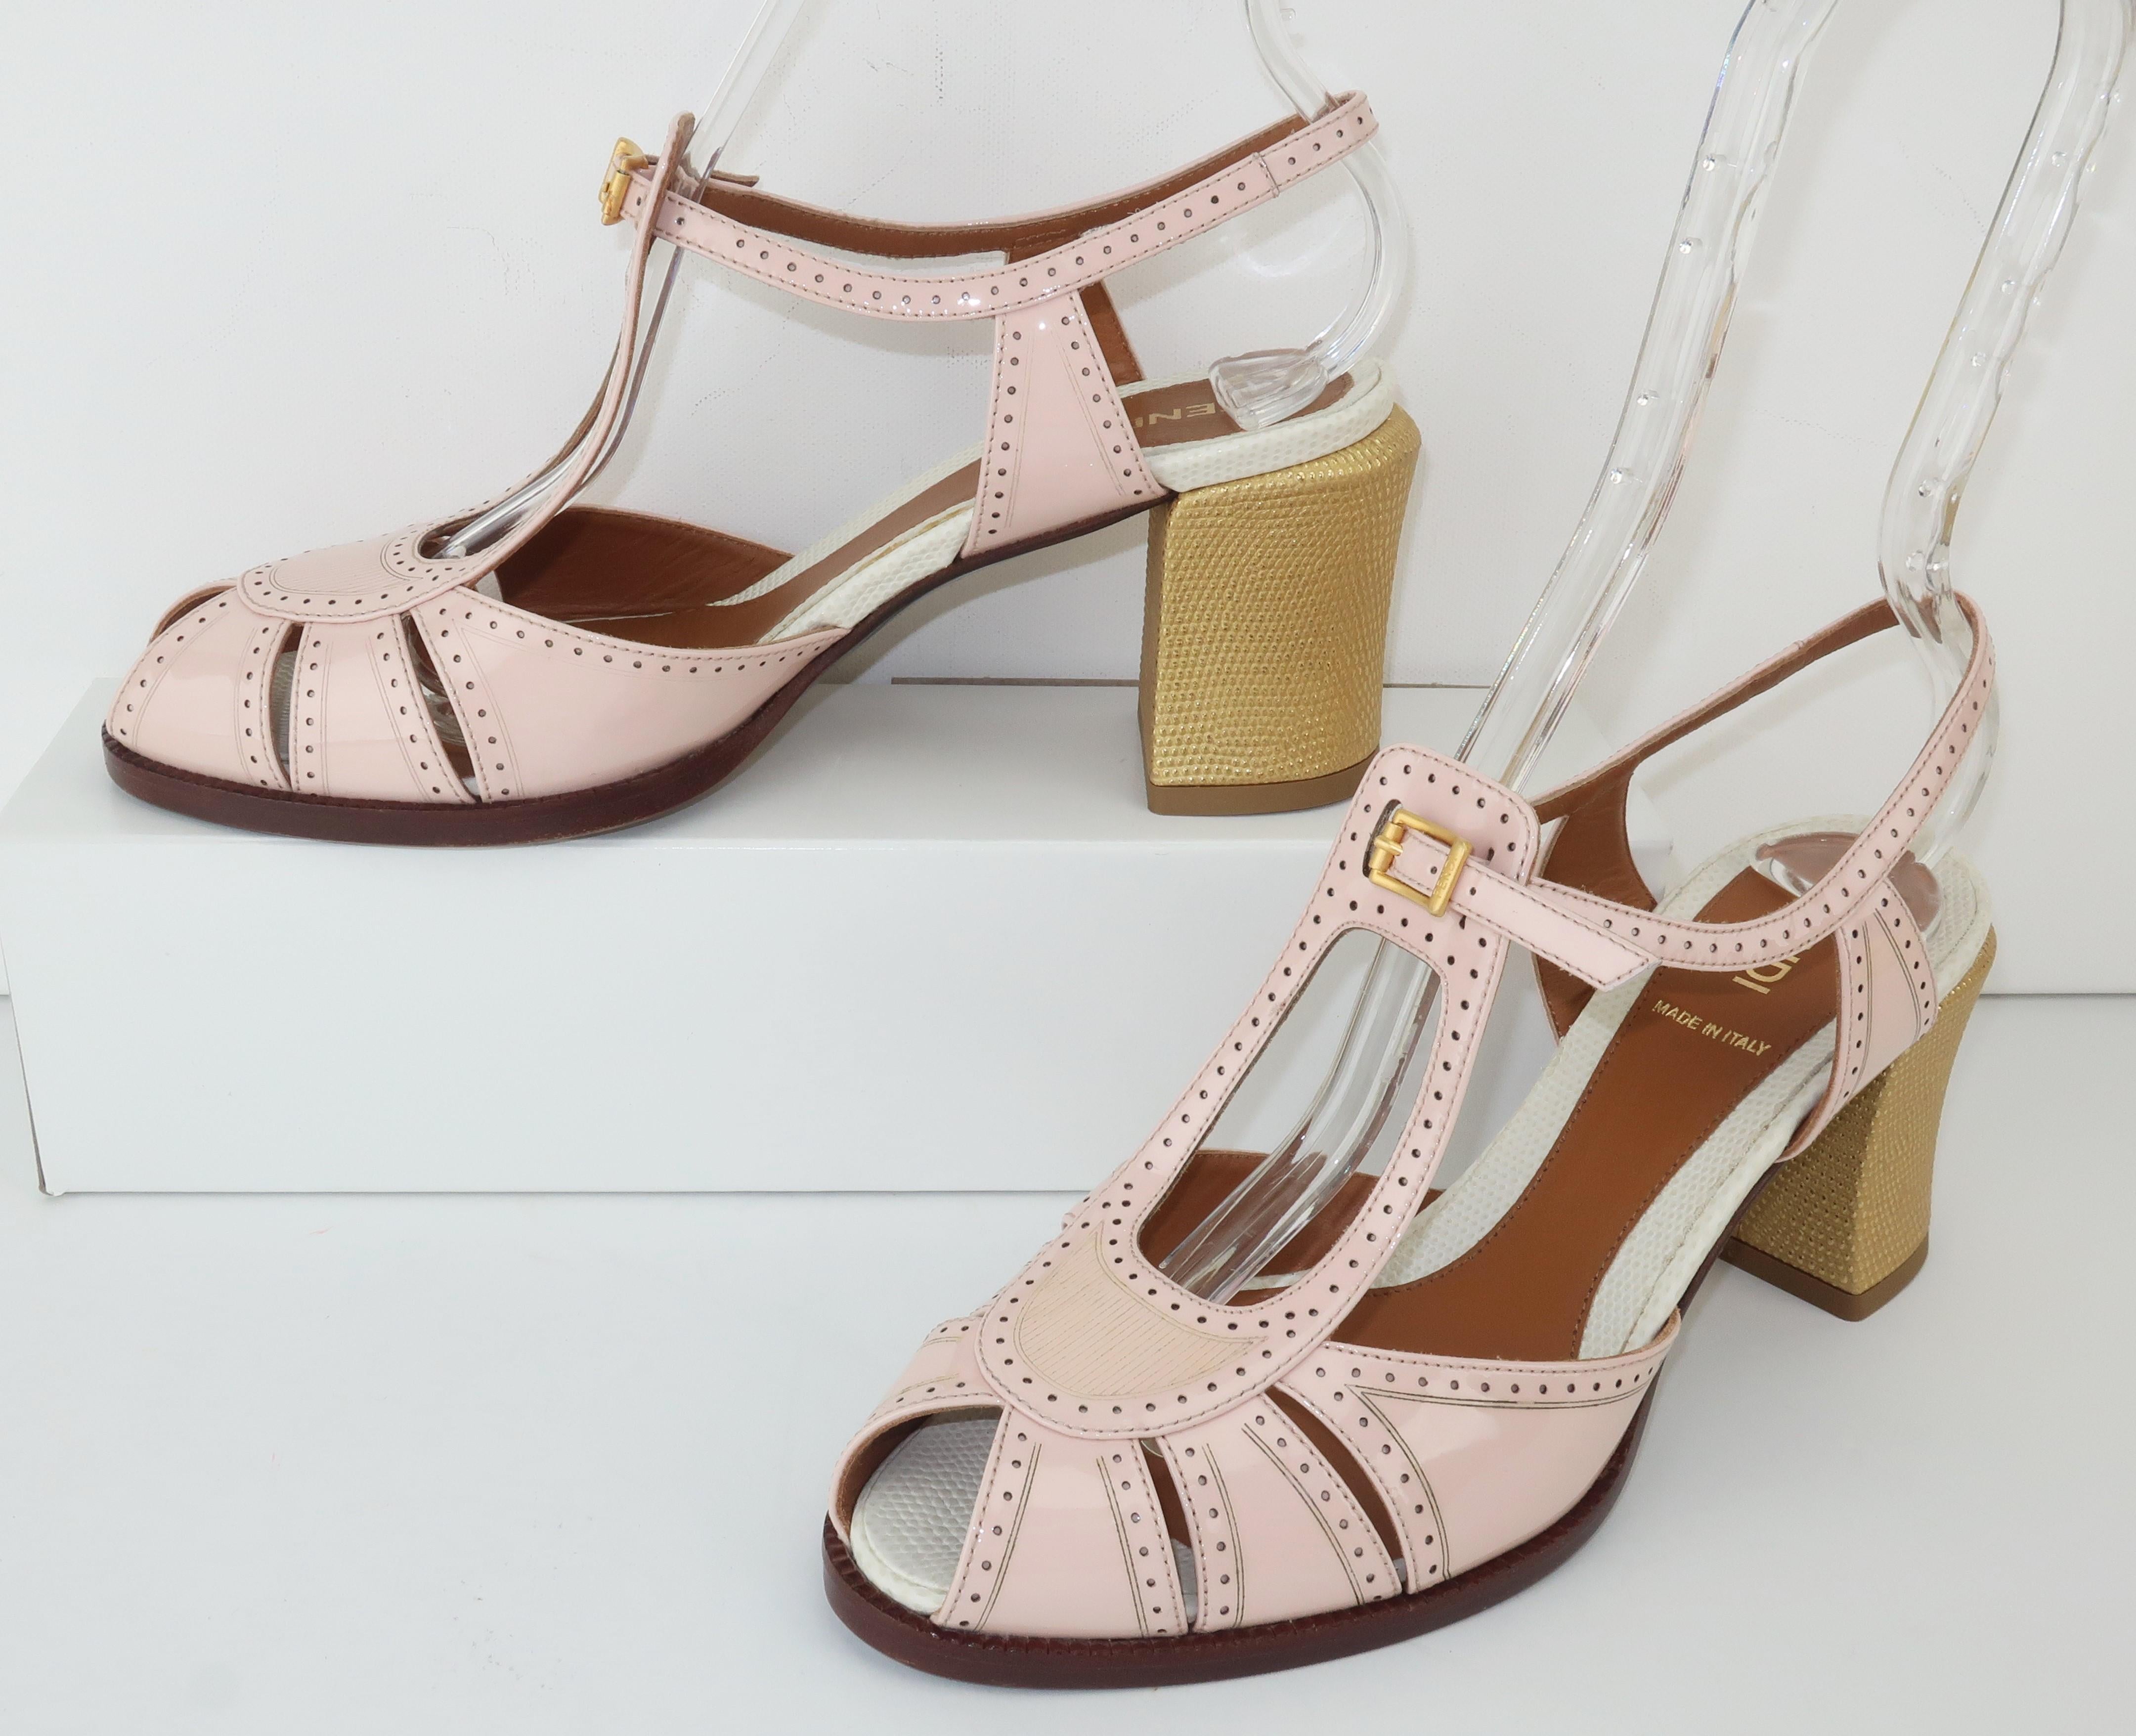 Fendi creates a peep toe t-strap sandal in pale pink patent leather with gold embossed leather heels and spectator styling reminiscent of glamorous 1930's looks. Adjustable buckle at the front and a sensible 3